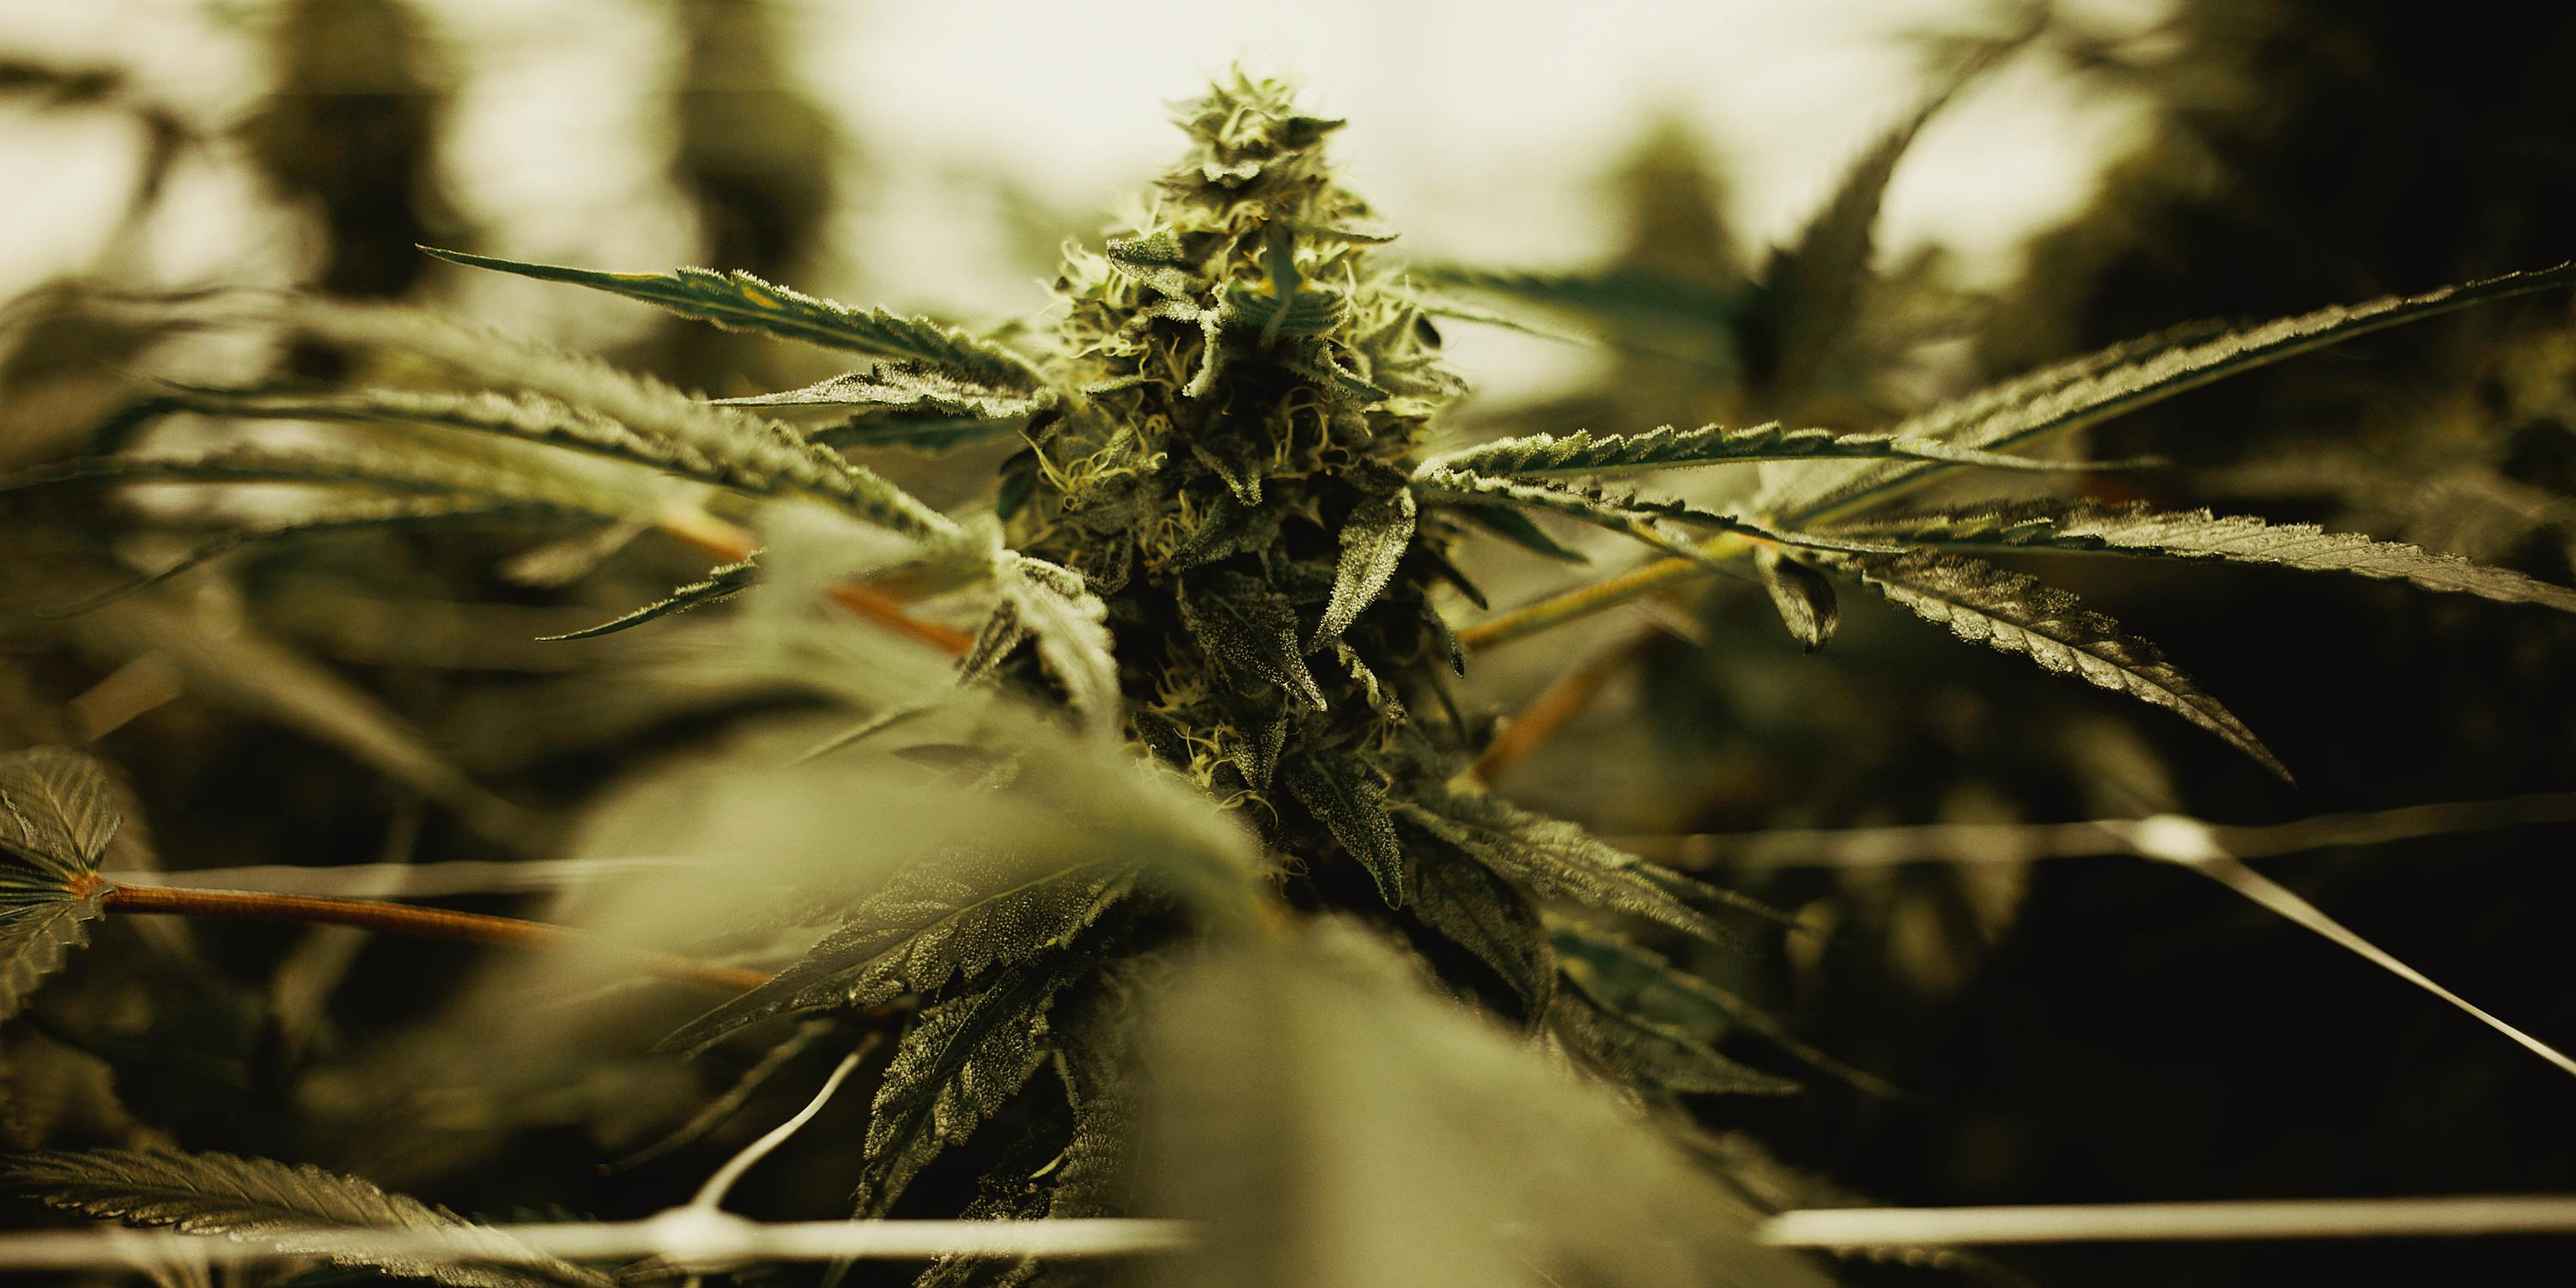 Growing Indoor vs. Outdoor Weed: What's the Difference? Here, a plant is shown close up